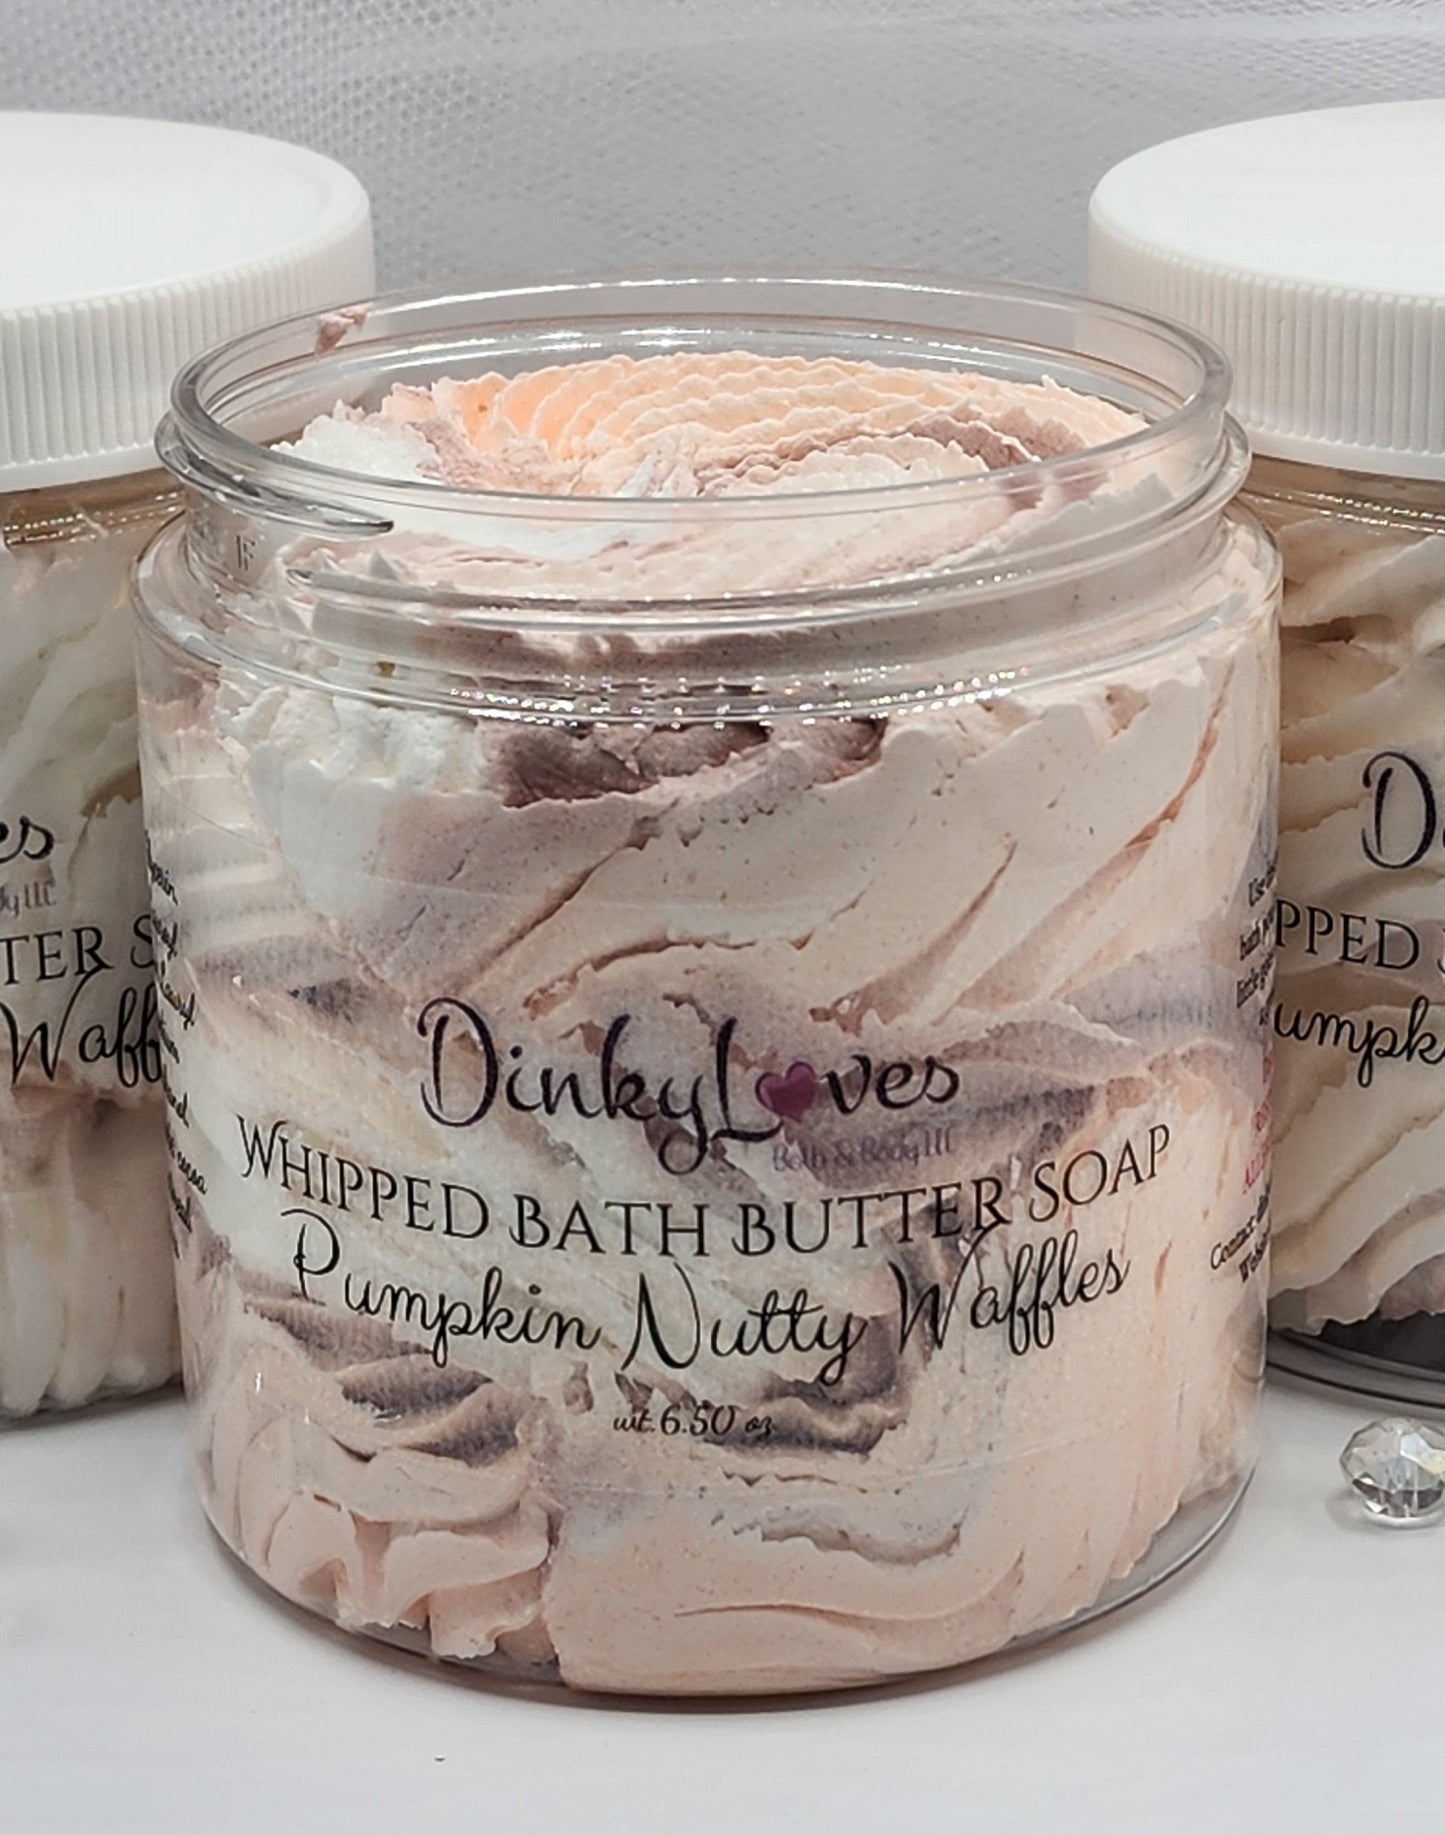 PUMPKIN NUTTY WAFFLES Whipped Bath Butter Soap / Gift Idea / Luxury Product / Cocoa Butter